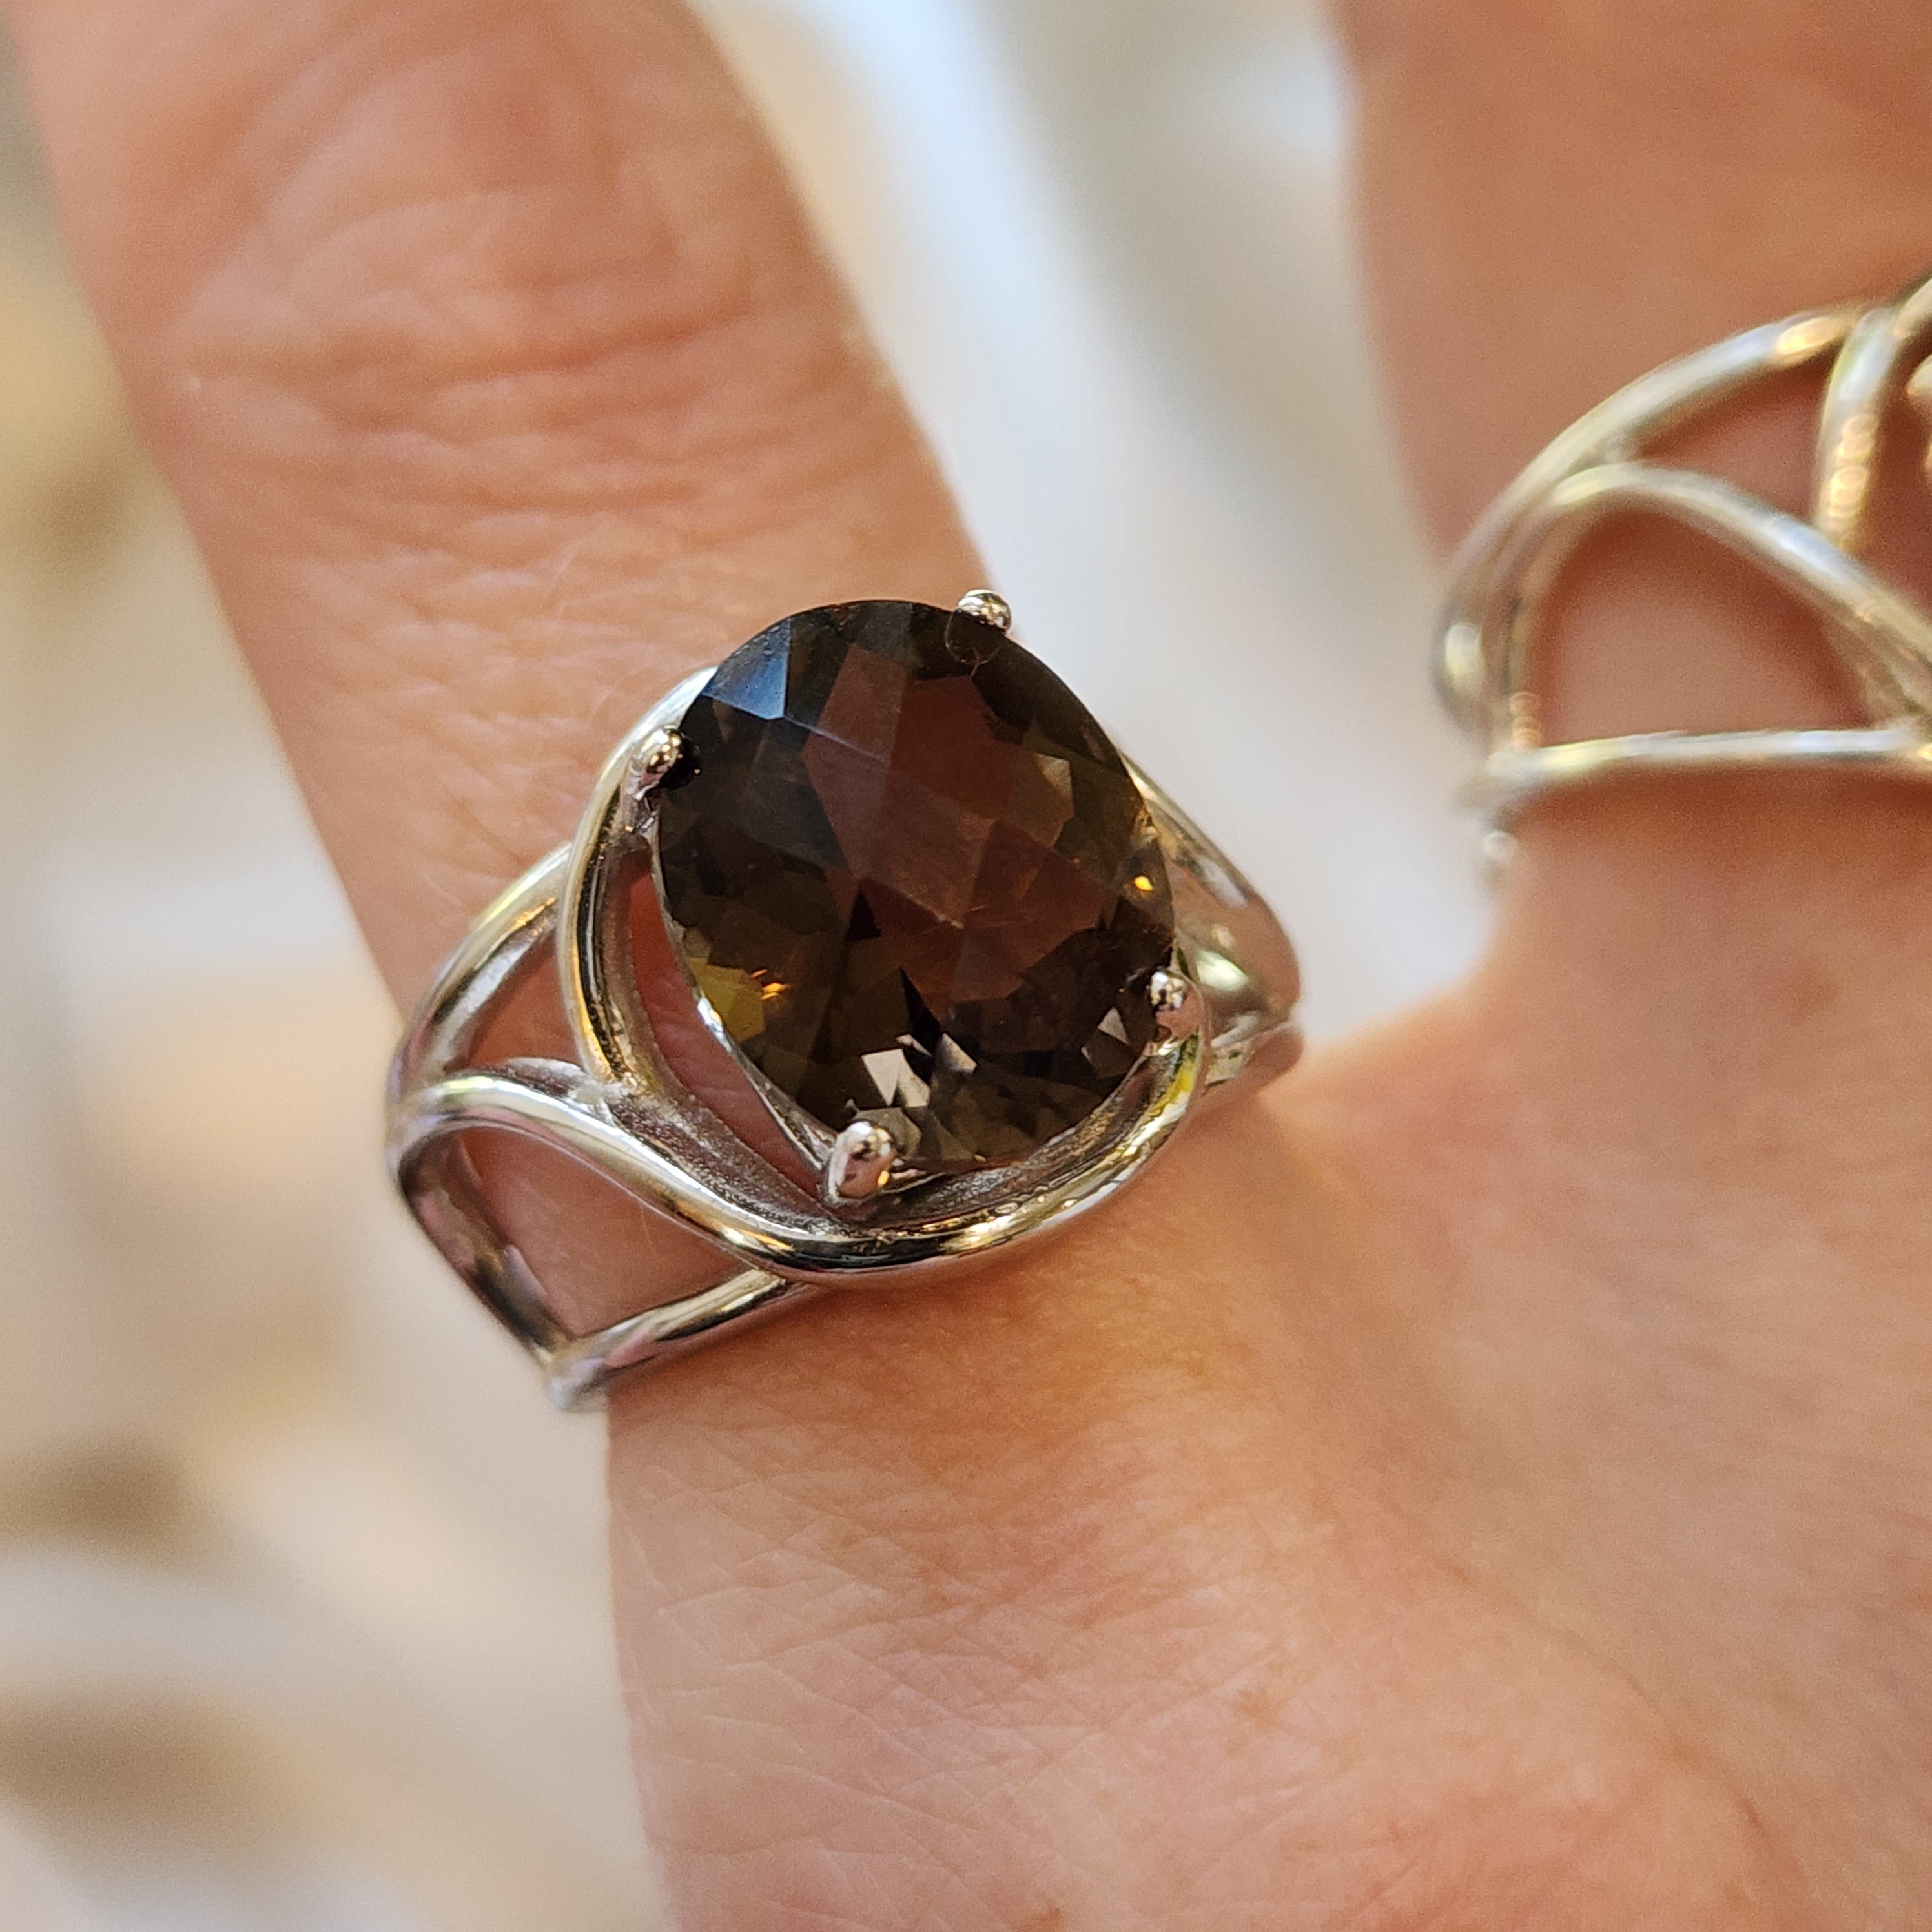 Smoky Quartz Finger Cuff Adjustable Ring .925 Silver for Energetic Cleansing, Manifestation and Protection